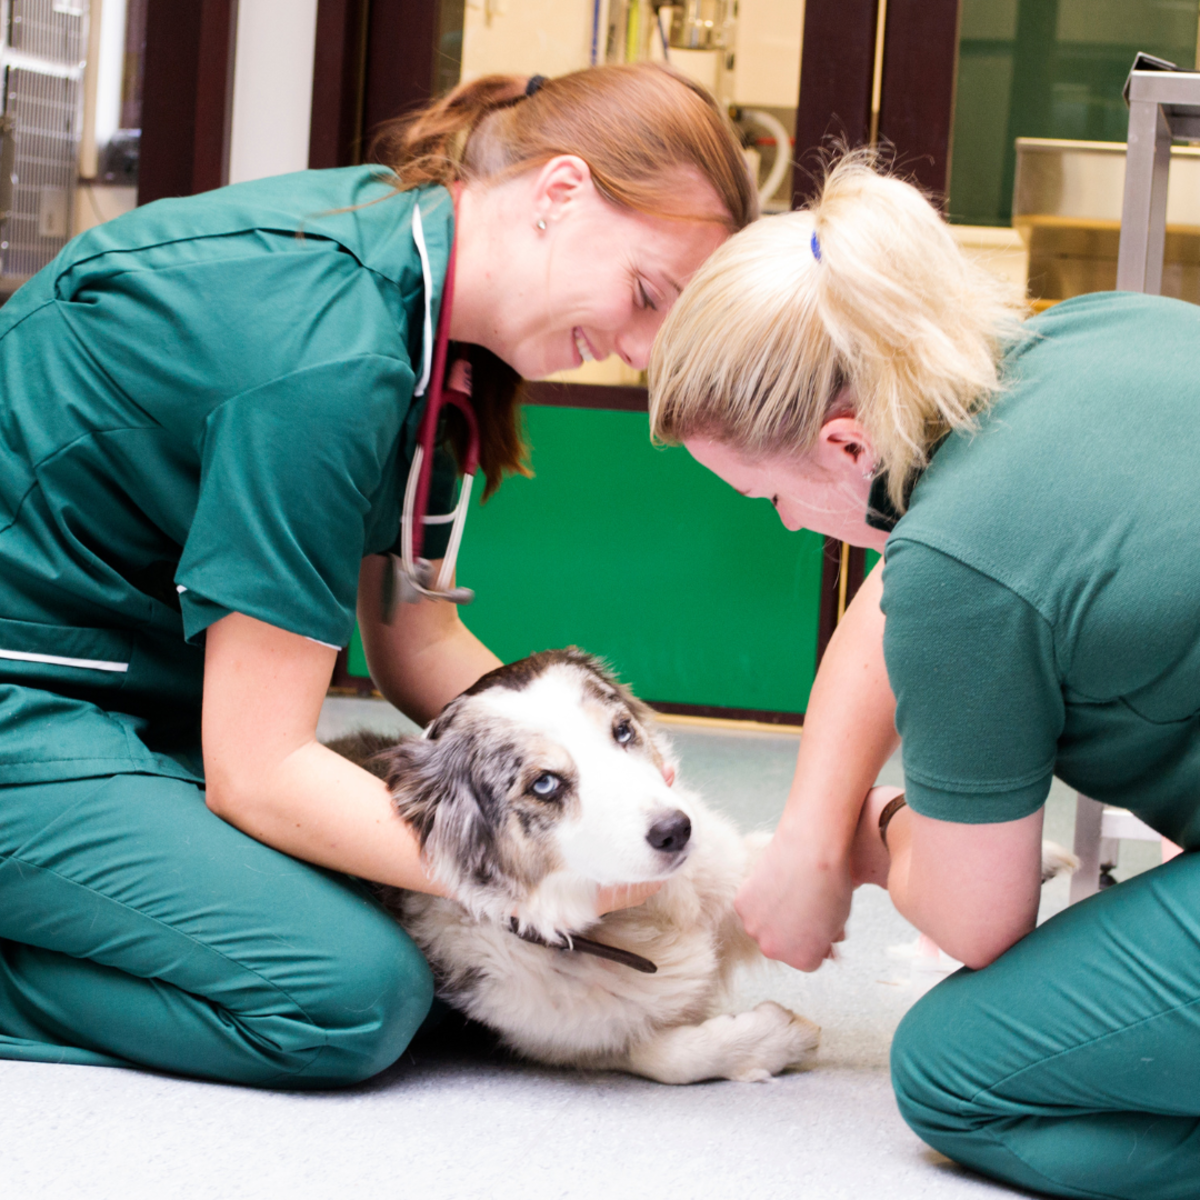 Can a Dog Survive With a Broken Back (Spinal Fracture)?